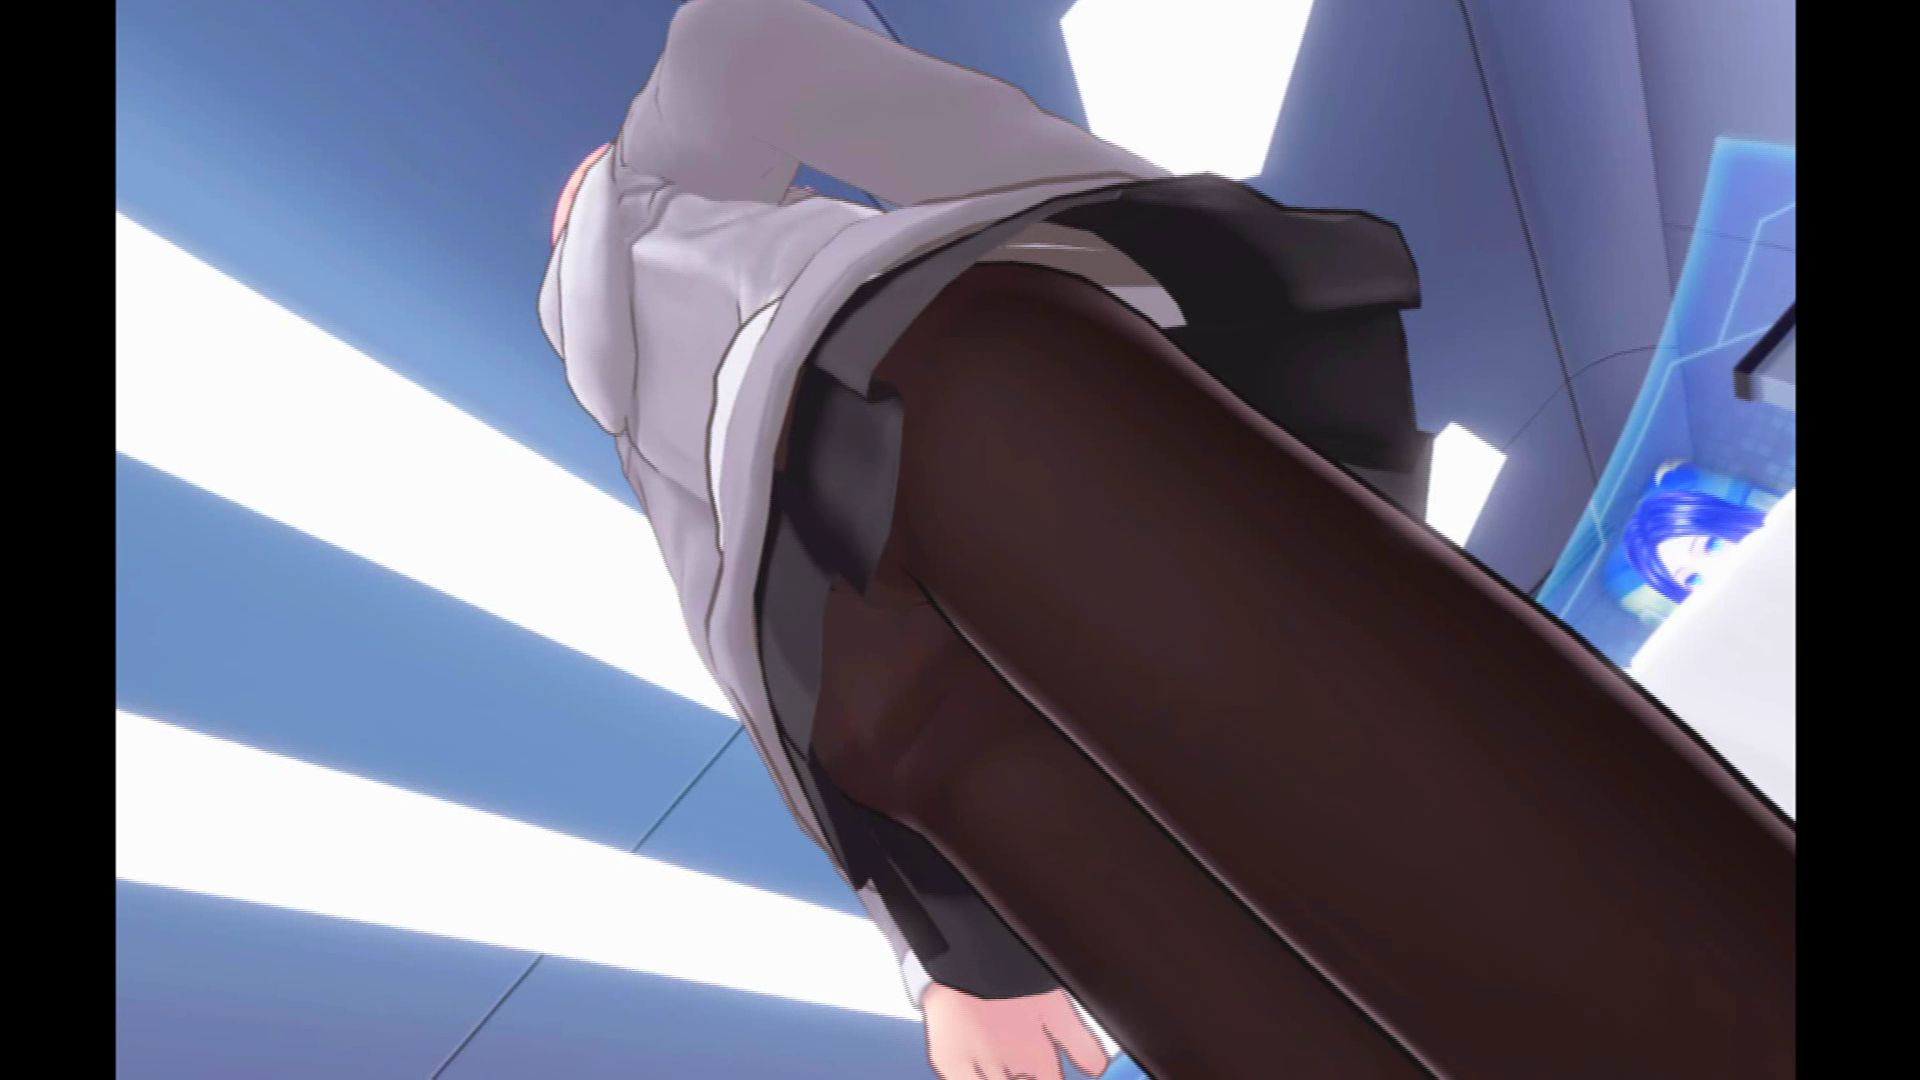 [Fate/Grand order VR] Maschsee underwear and breast! The underwear of the alto rear, too! 4